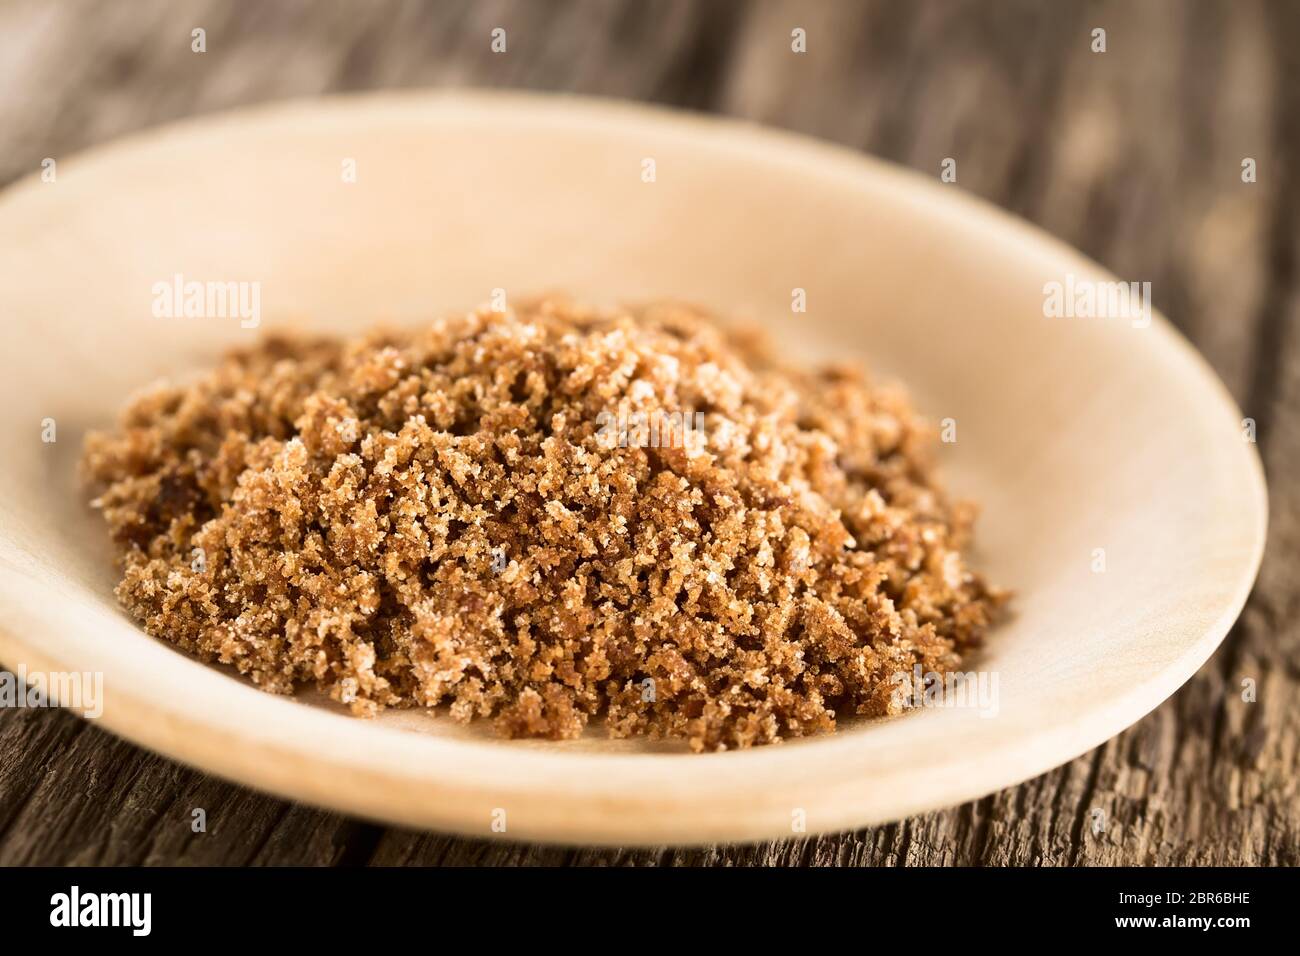 Grated panela or chancaca raw unrefined cane sugar on wooden plate (Selective Focus, Focus one third into the sugar) Stock Photo